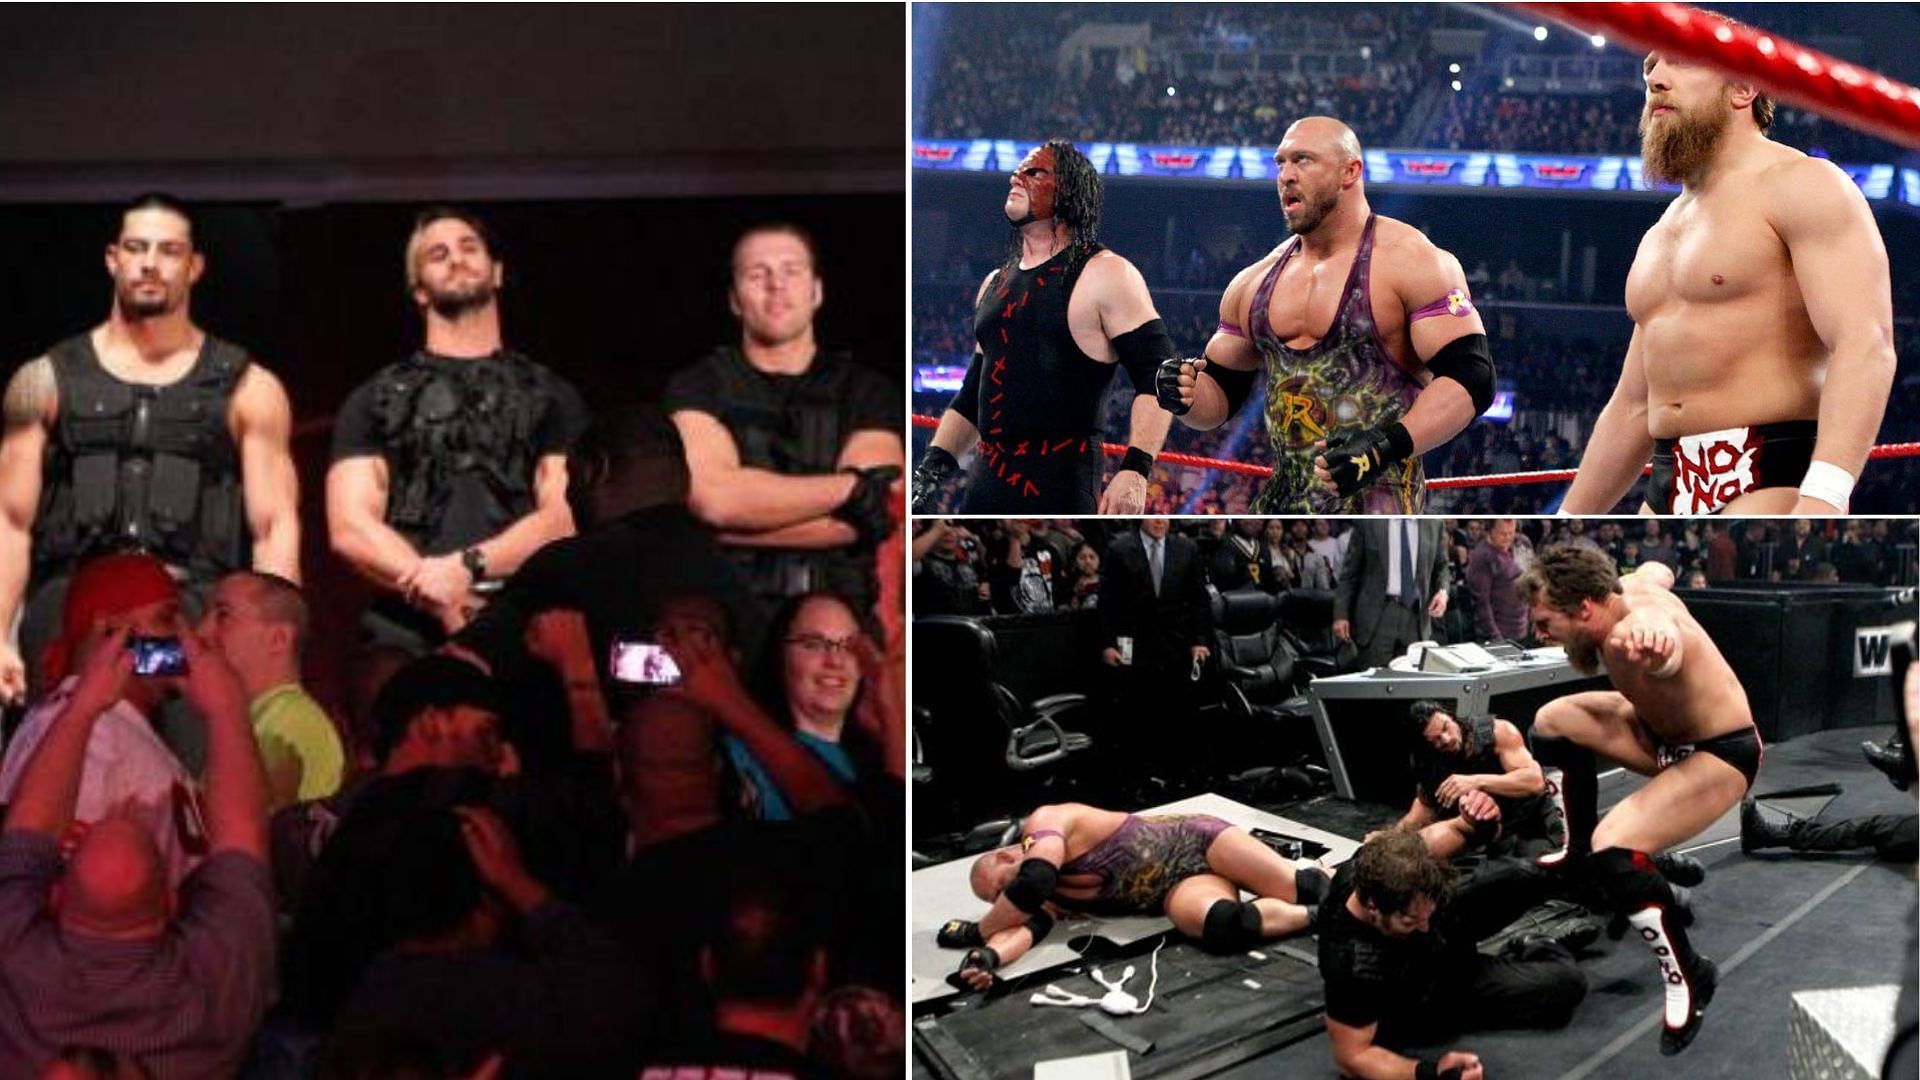 The Shield versus Ryback and Team Hell No in a TLC match in December 2012.